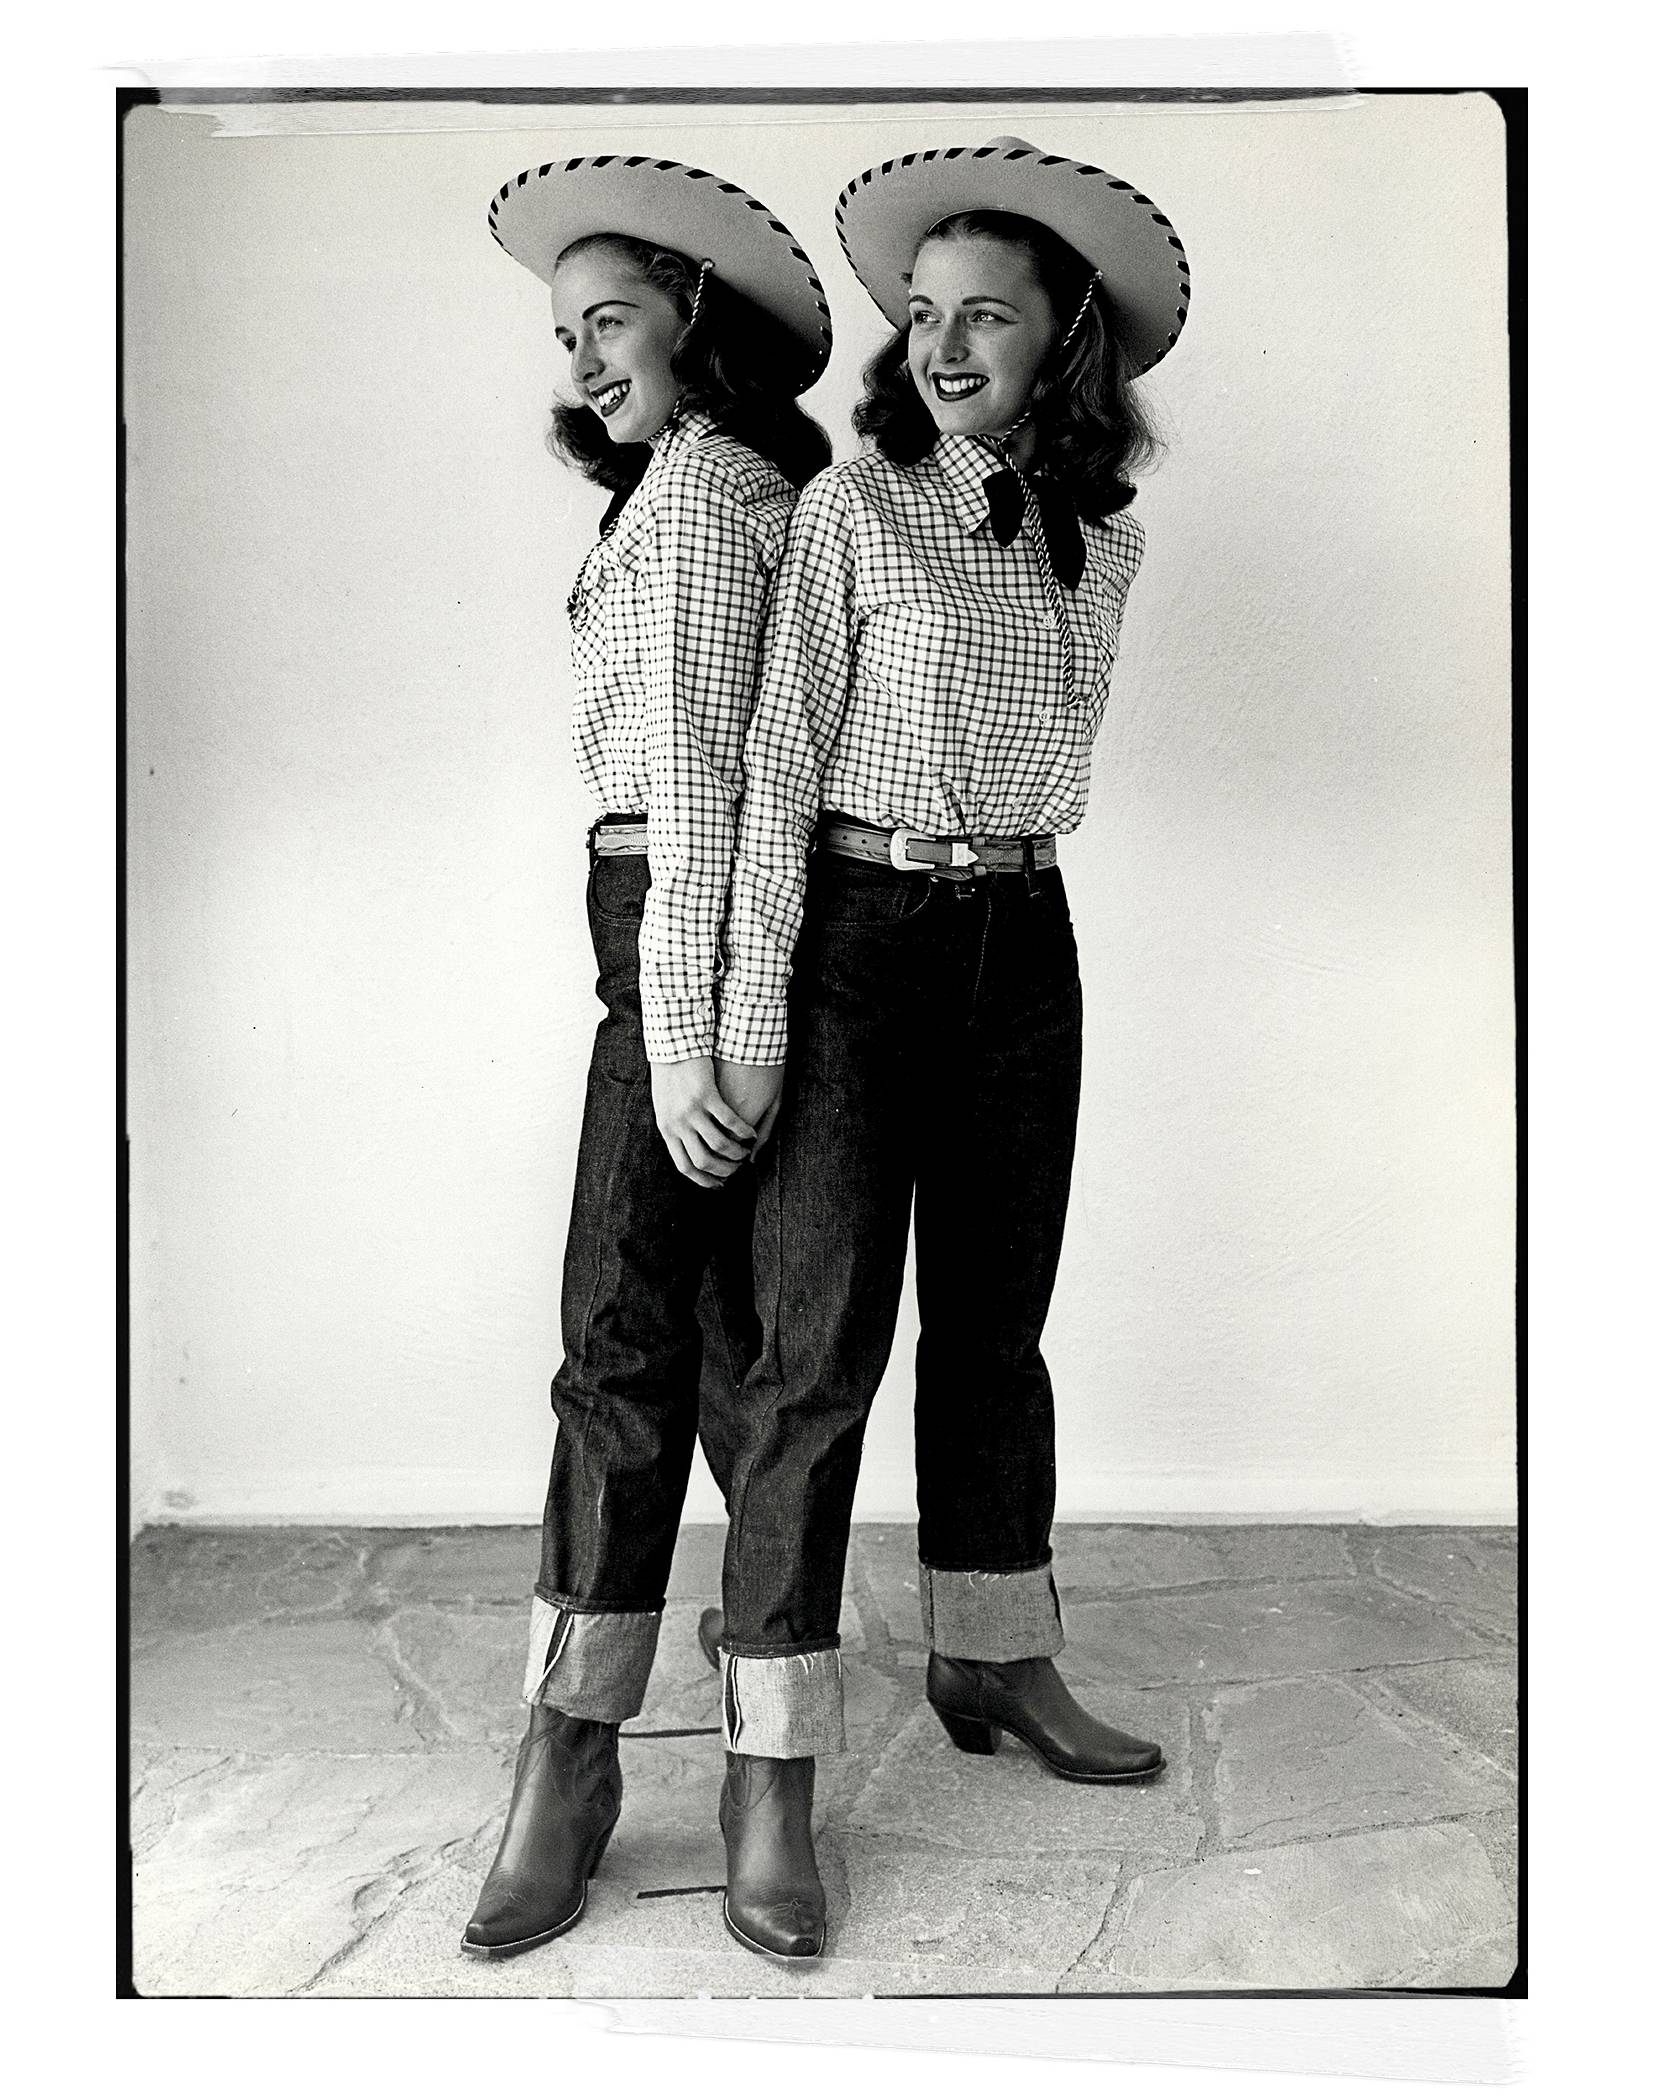 Twins wearing cowboy hats with a checkered shirt and Levi's jeans.